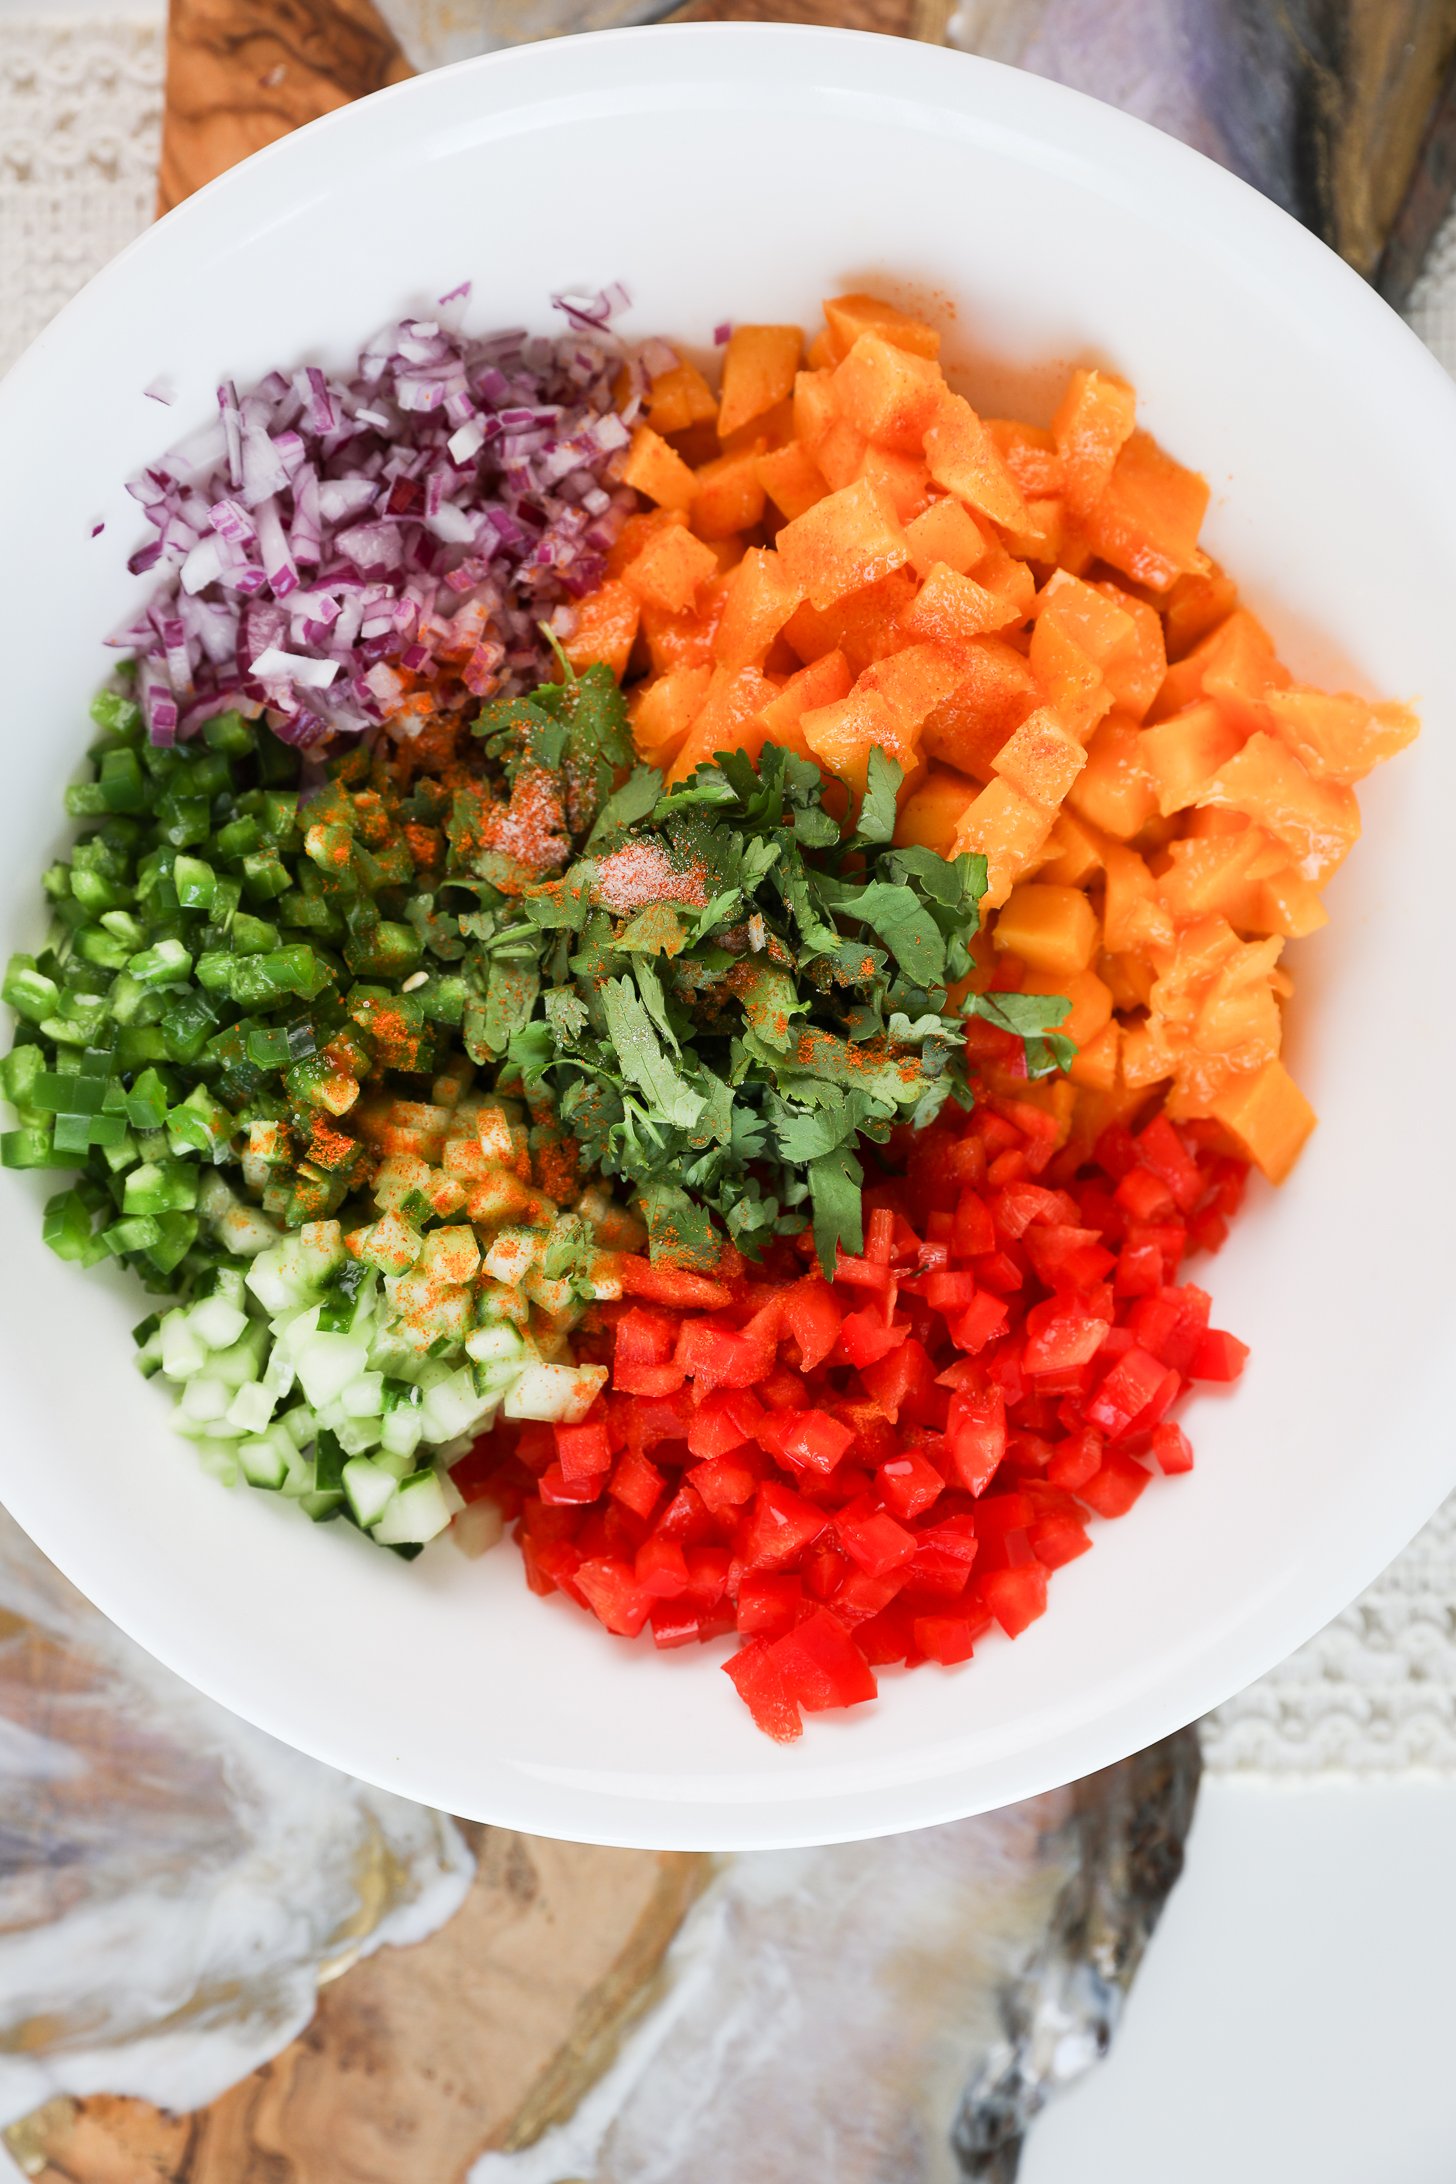 A bowl of diced produce including mangoes, pepper, onion, cucumber, cilantro and jalapeno, topped with salt and spice.